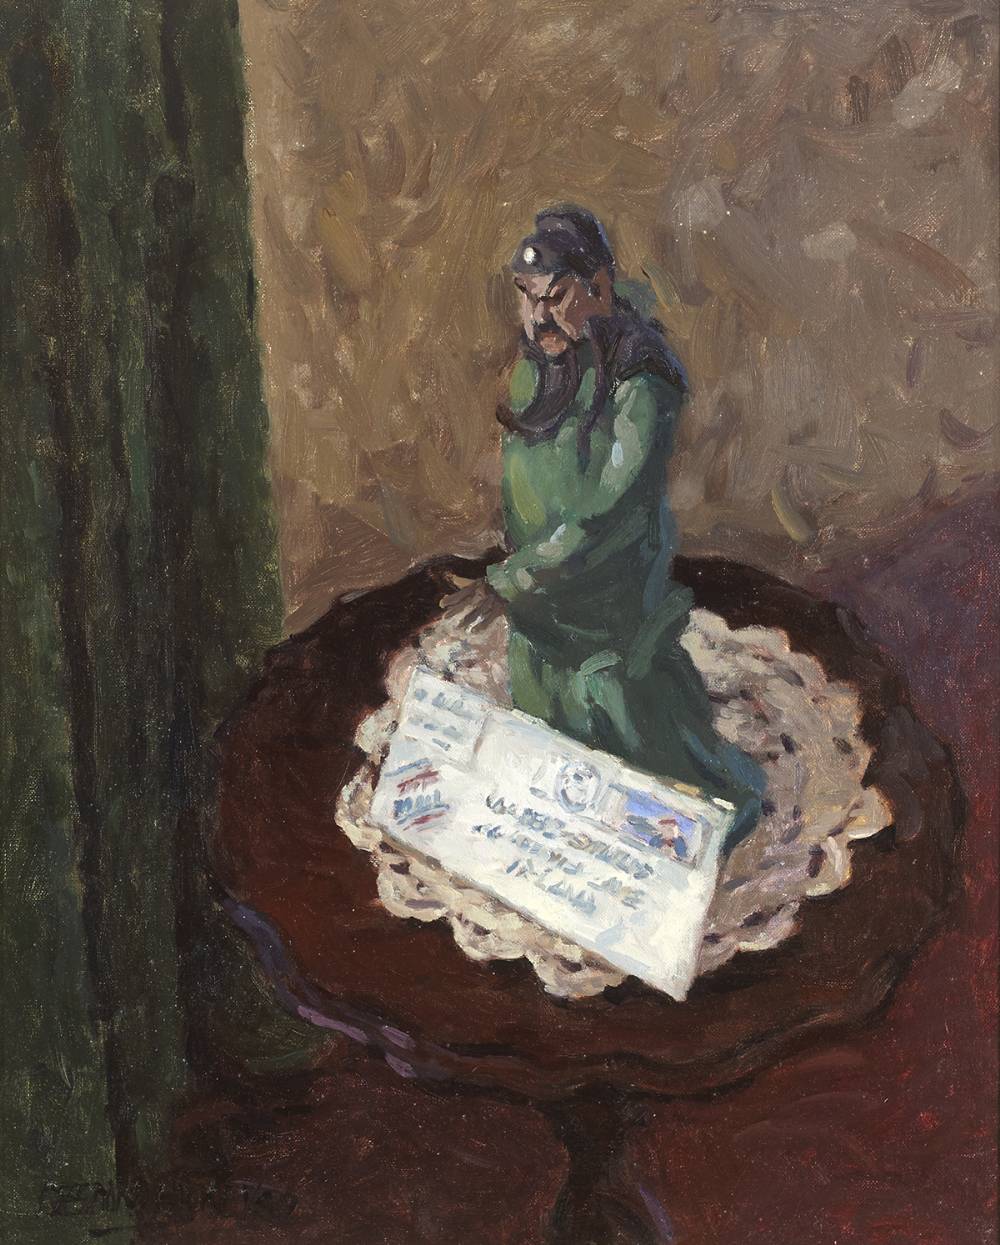 LETTER FOR GERTIE, 1989 by Desmond Hickey sold for 160 at Whyte's Auctions